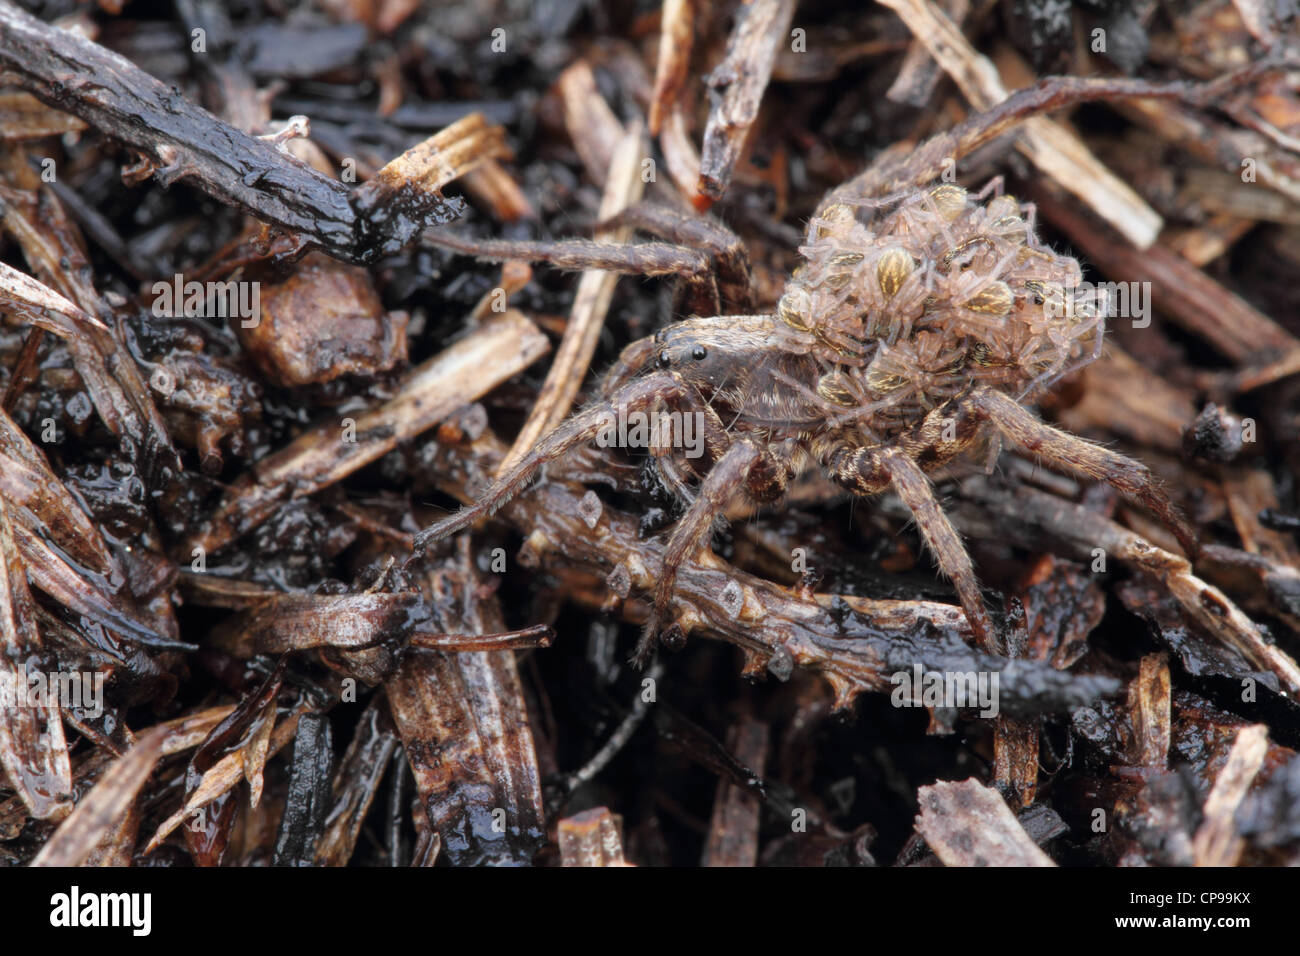 Wolf spider carrying her young Stock Photo